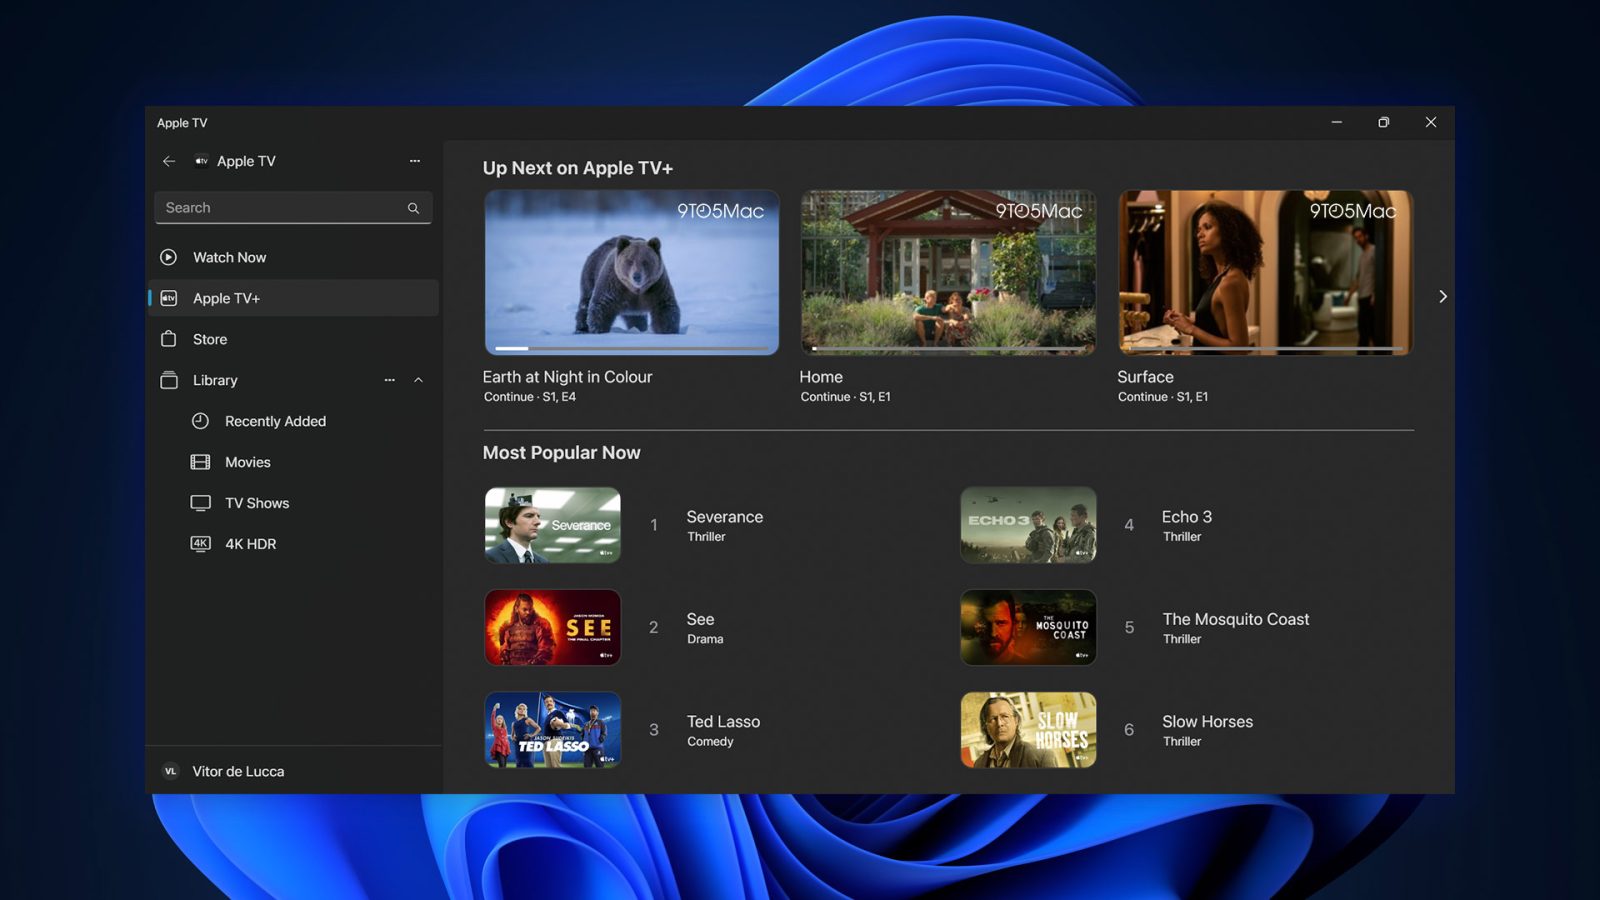 Here's a first look at the Apple Music, Apple TV, and Apple Devices apps coming to Windows 11